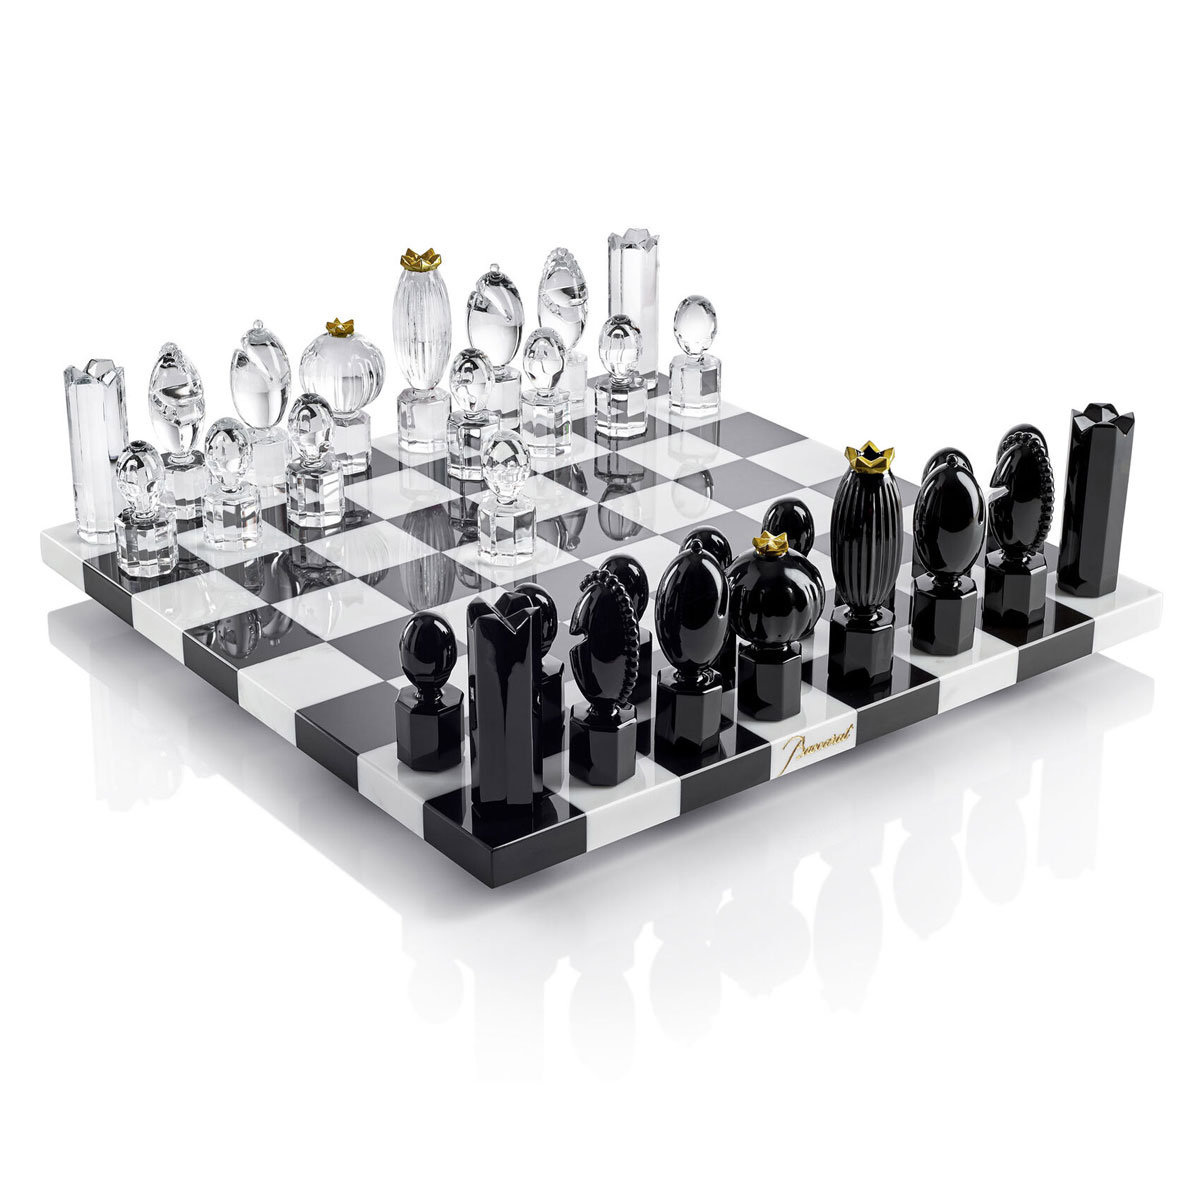 Baccarat Chess Set by Marcel Wanders Studio, Limited Edition